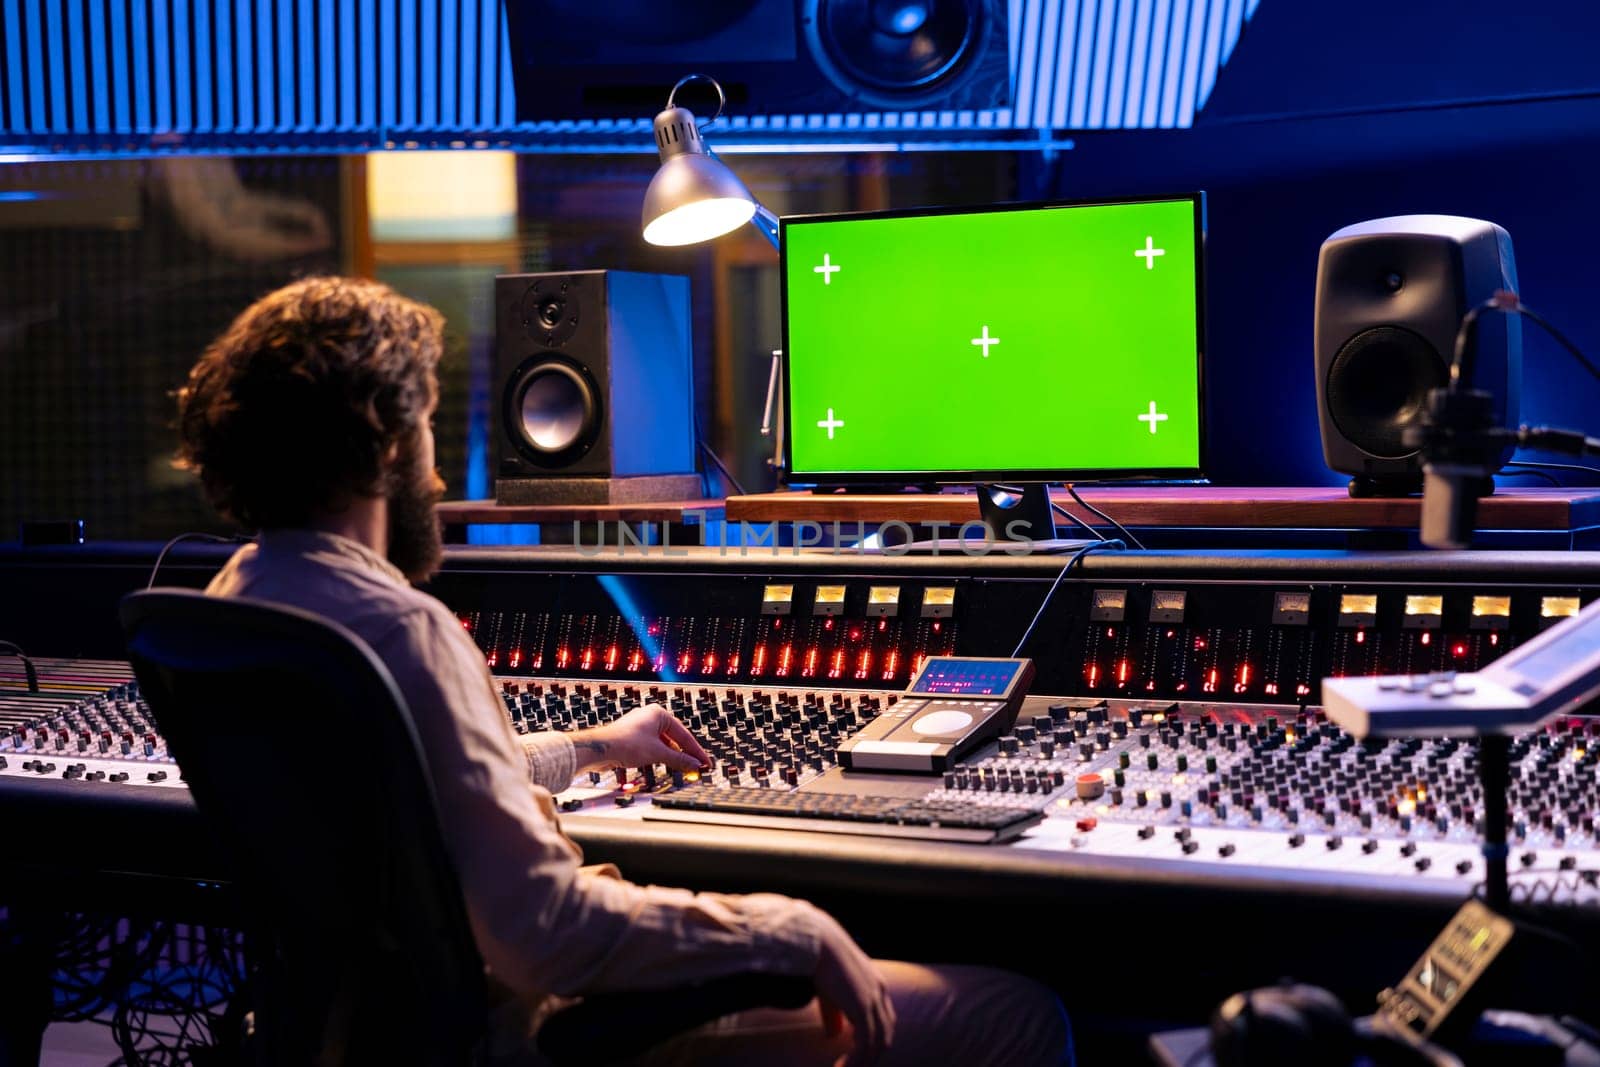 Sound designer working on mixing and mastering tracks with mockup display by DCStudio